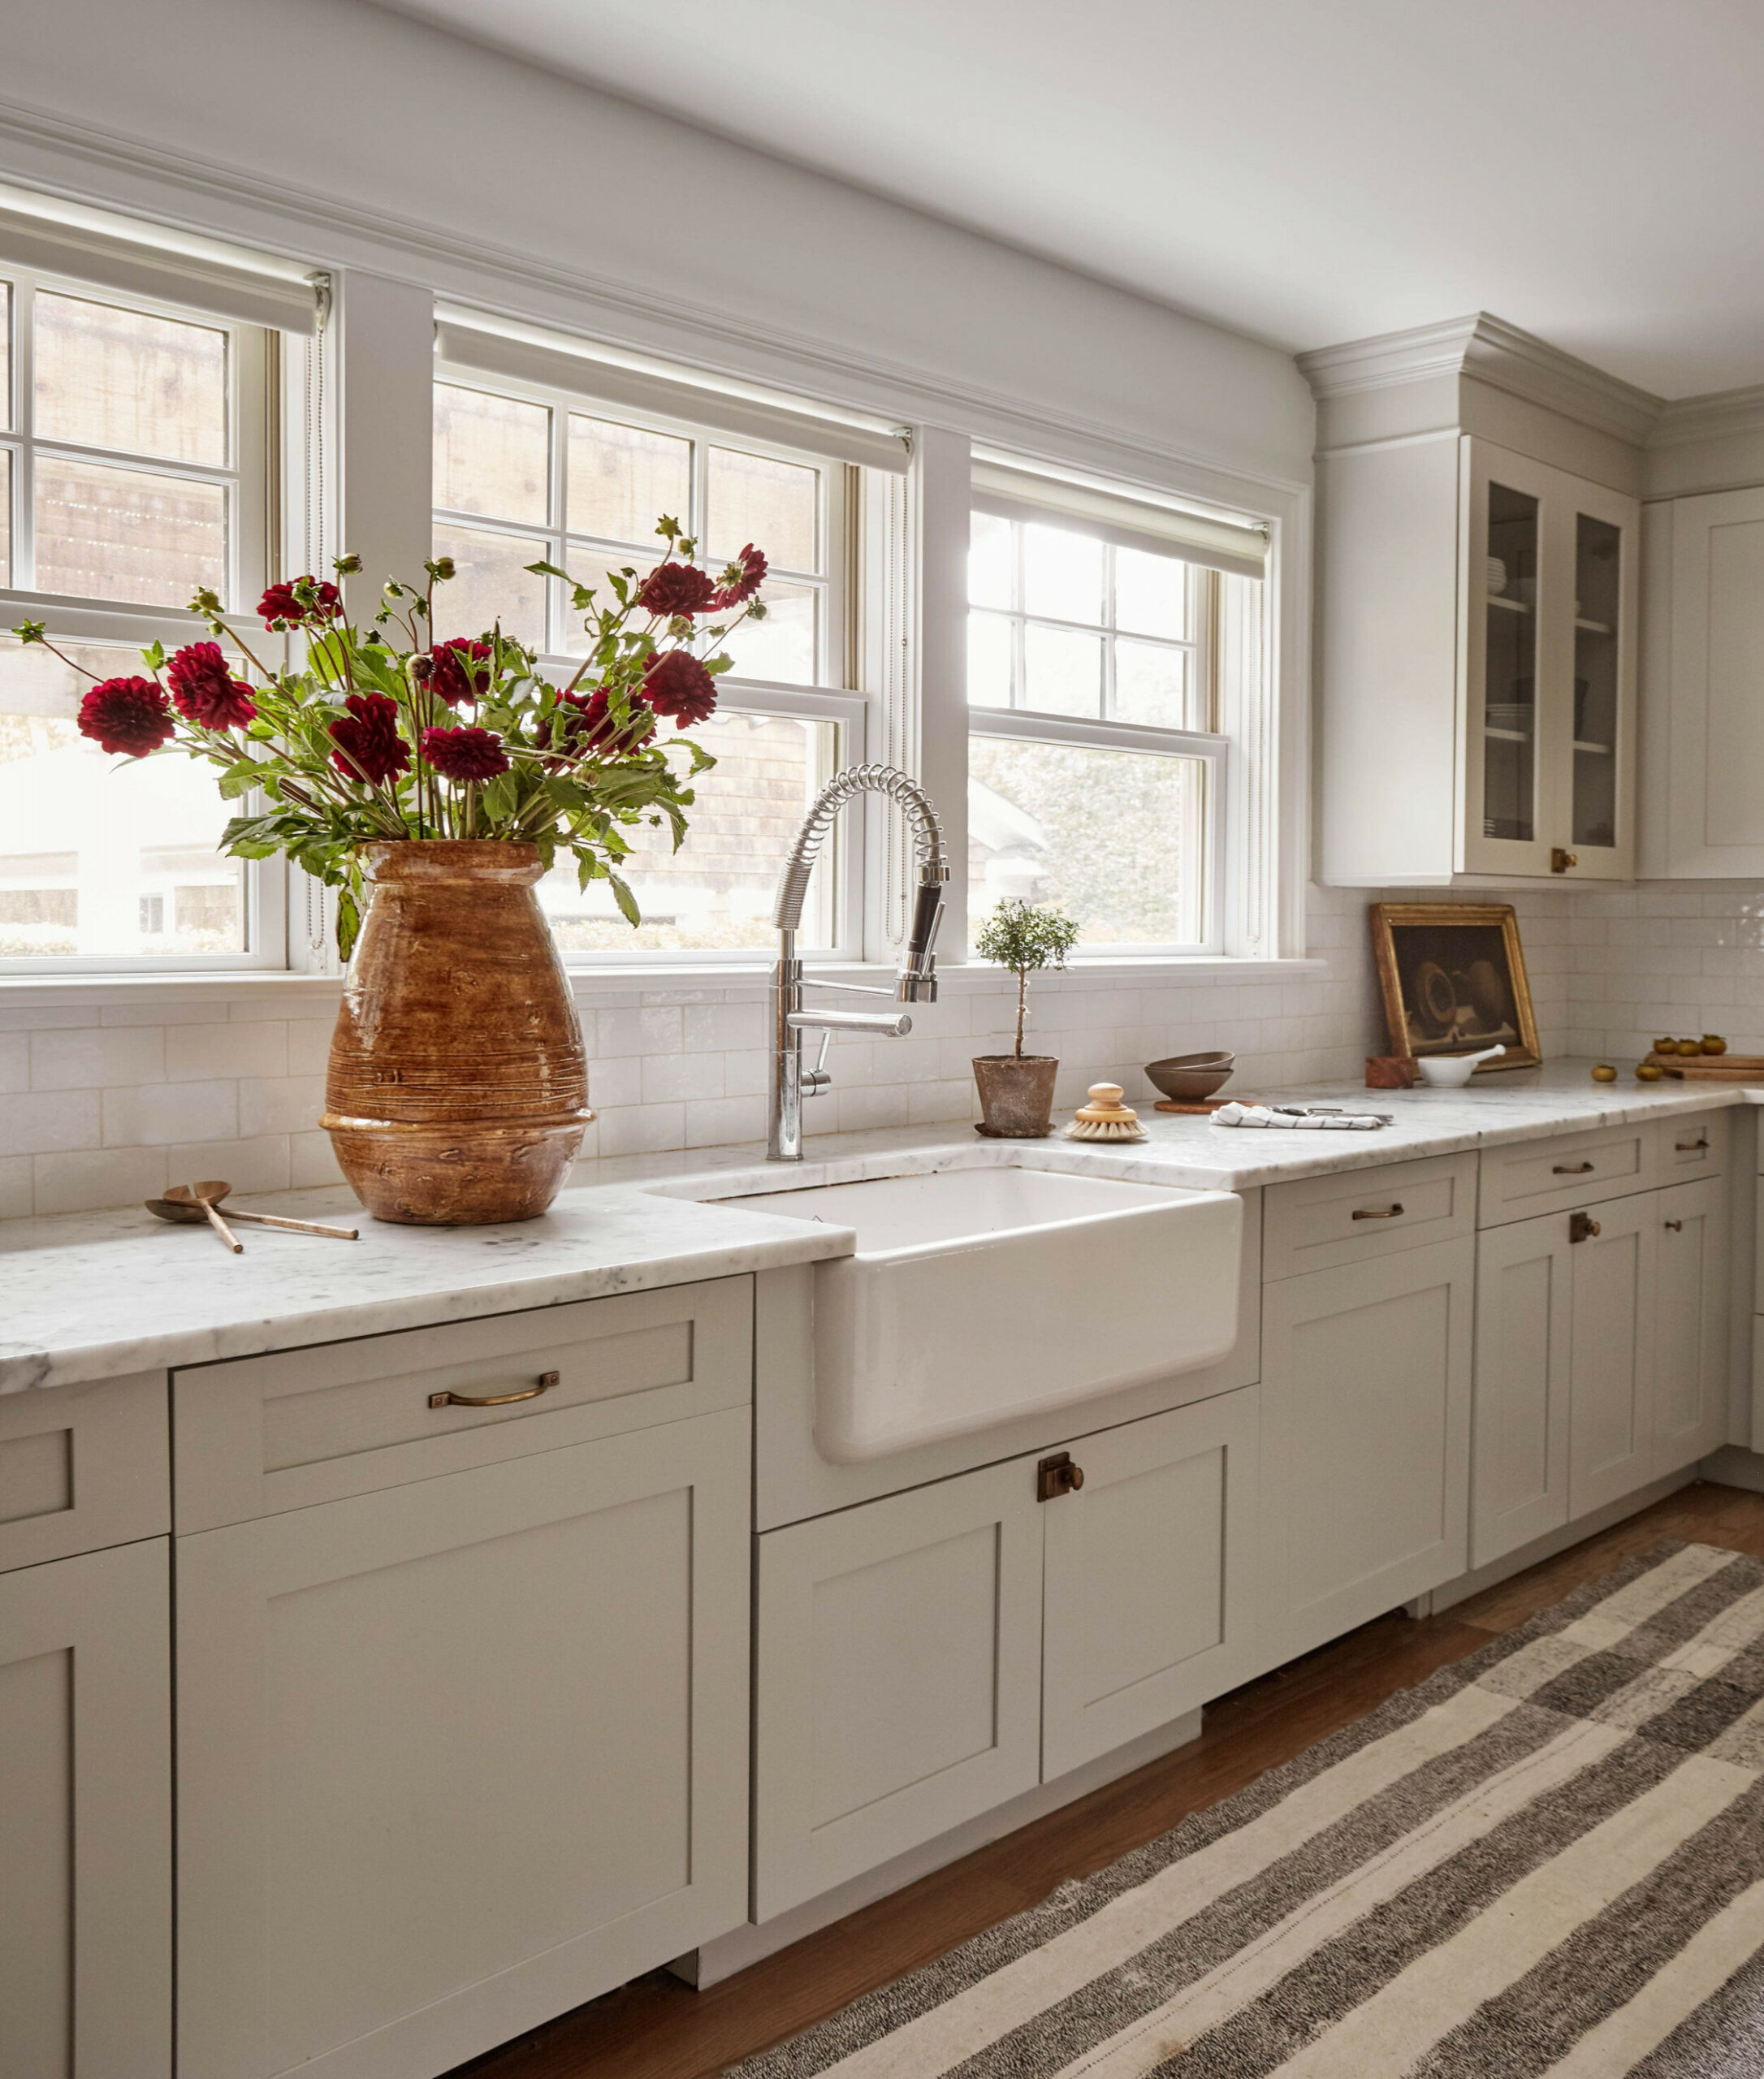 Classic Kitchen Ideas That Never Go Out of Style